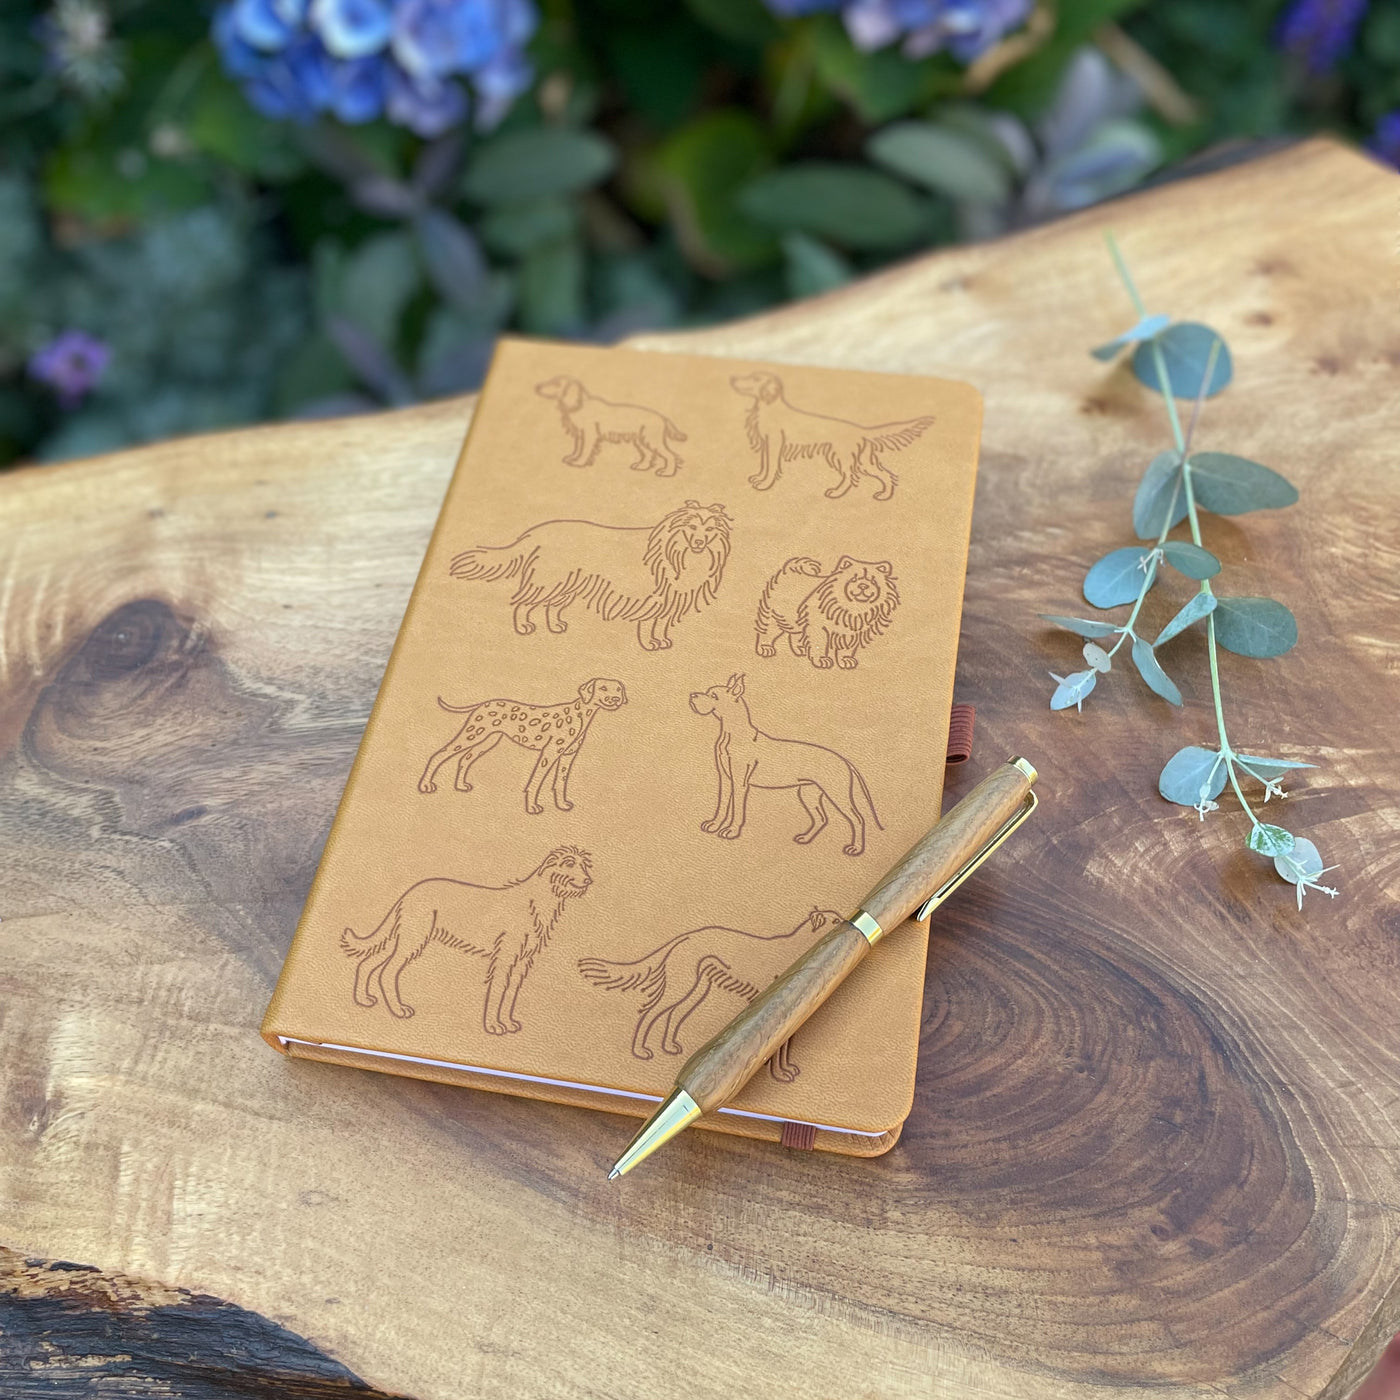 "All the Dogs" vegan Leather Notebook, embossed with different dog breeds on the cover